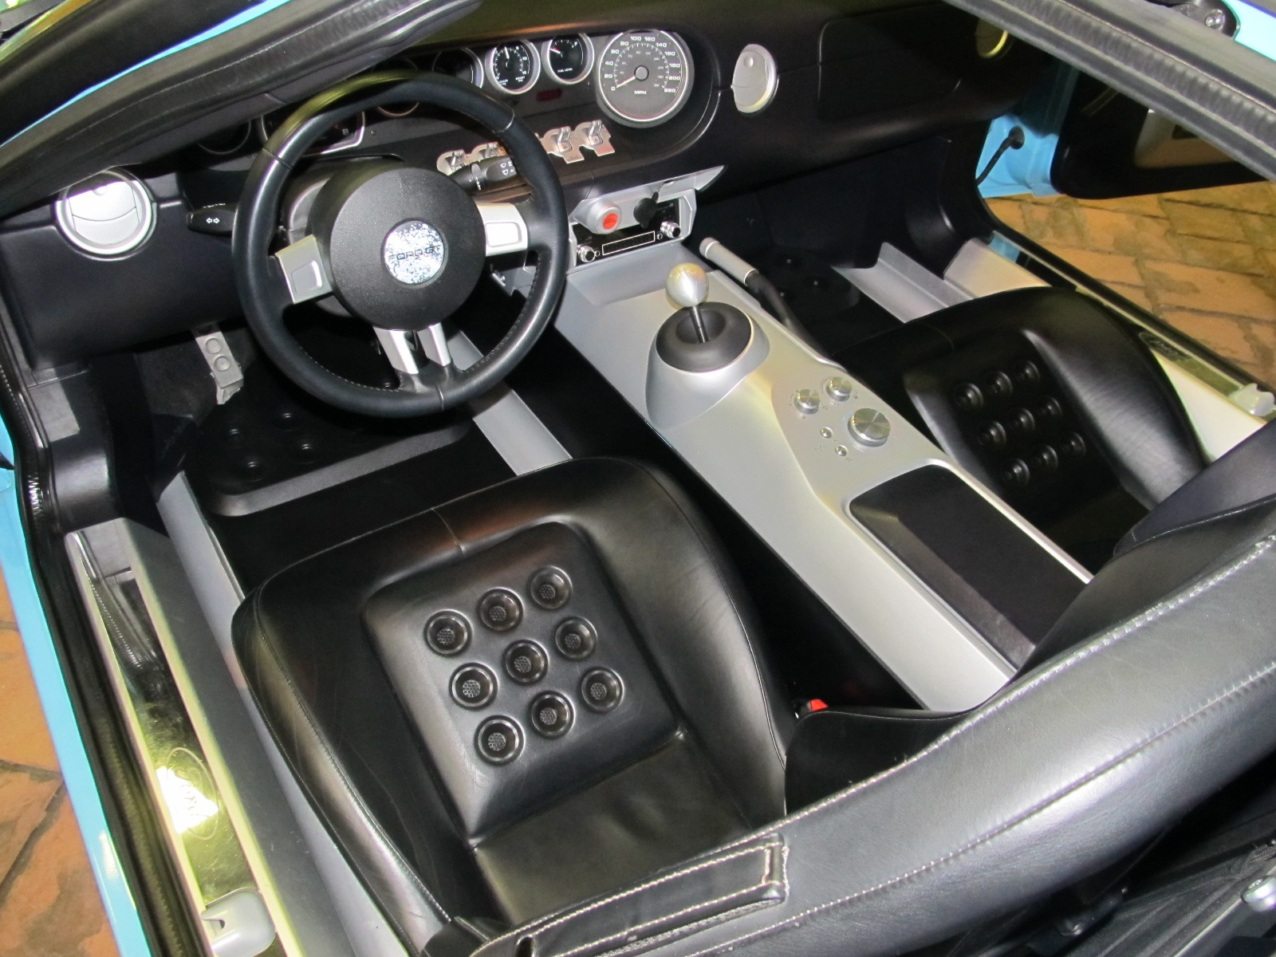 Ford GT Specs include a comfortable interior of leather and aluminum